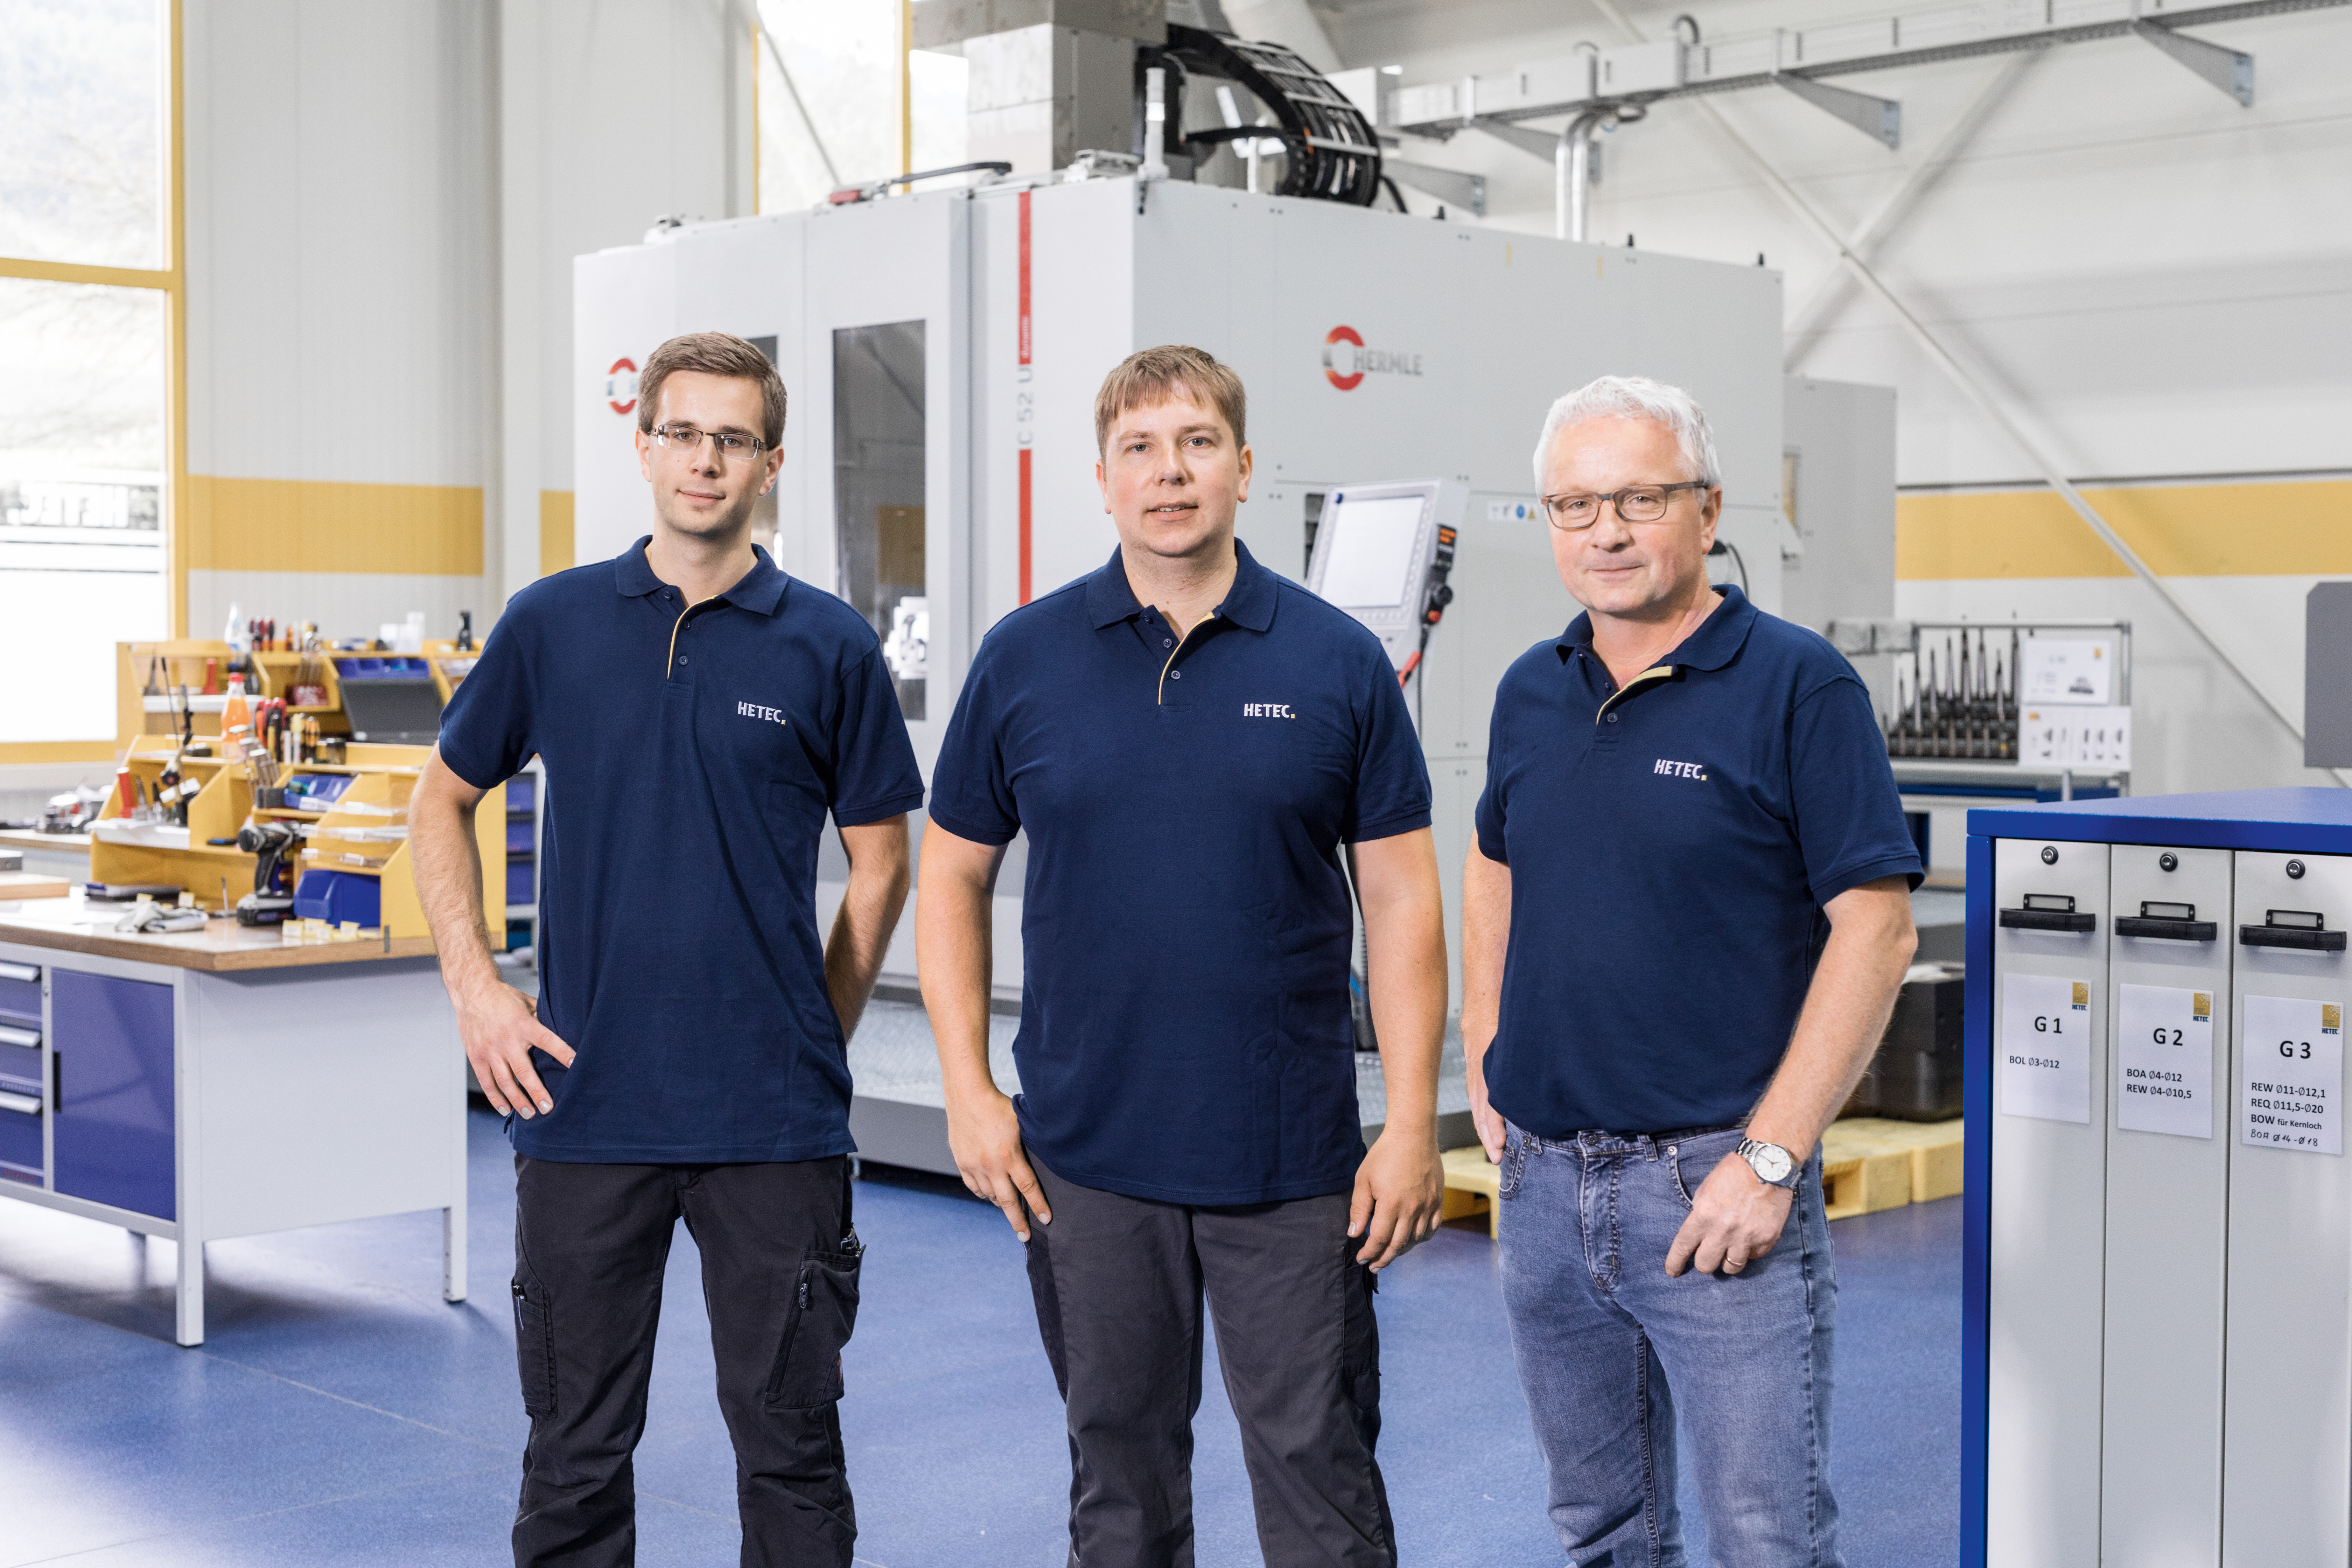 from right to left side Friedhelm Herhaus, Managing Director, Christoph Schneider, Group Leader Milling Technology, and Tom Herhaus, Applications Engineering/Operator, all from machining service provider HETEC GmbH